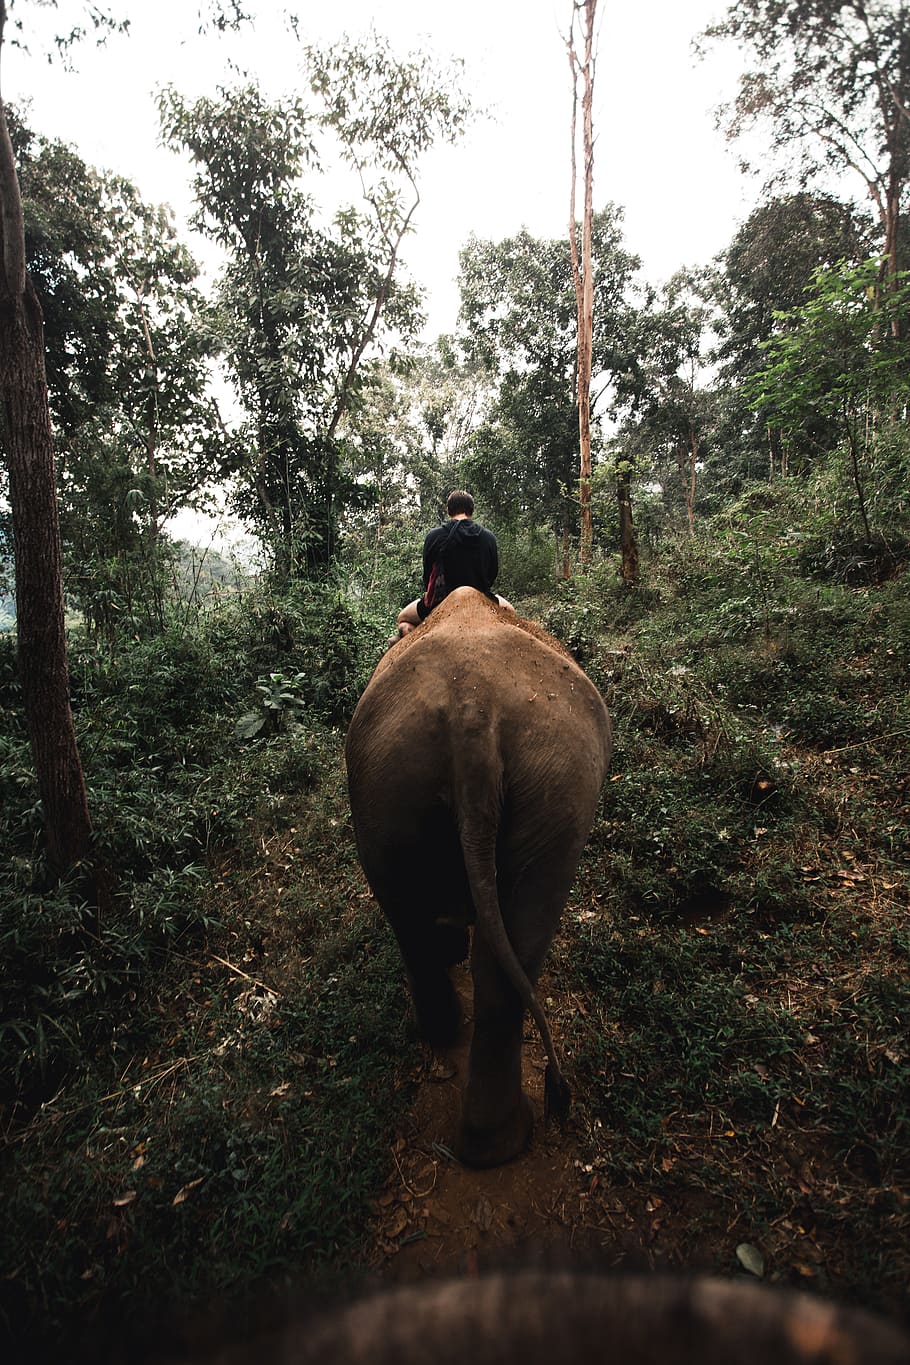 person riding elephant in woods during daytime, mammal, wildlife, HD wallpaper